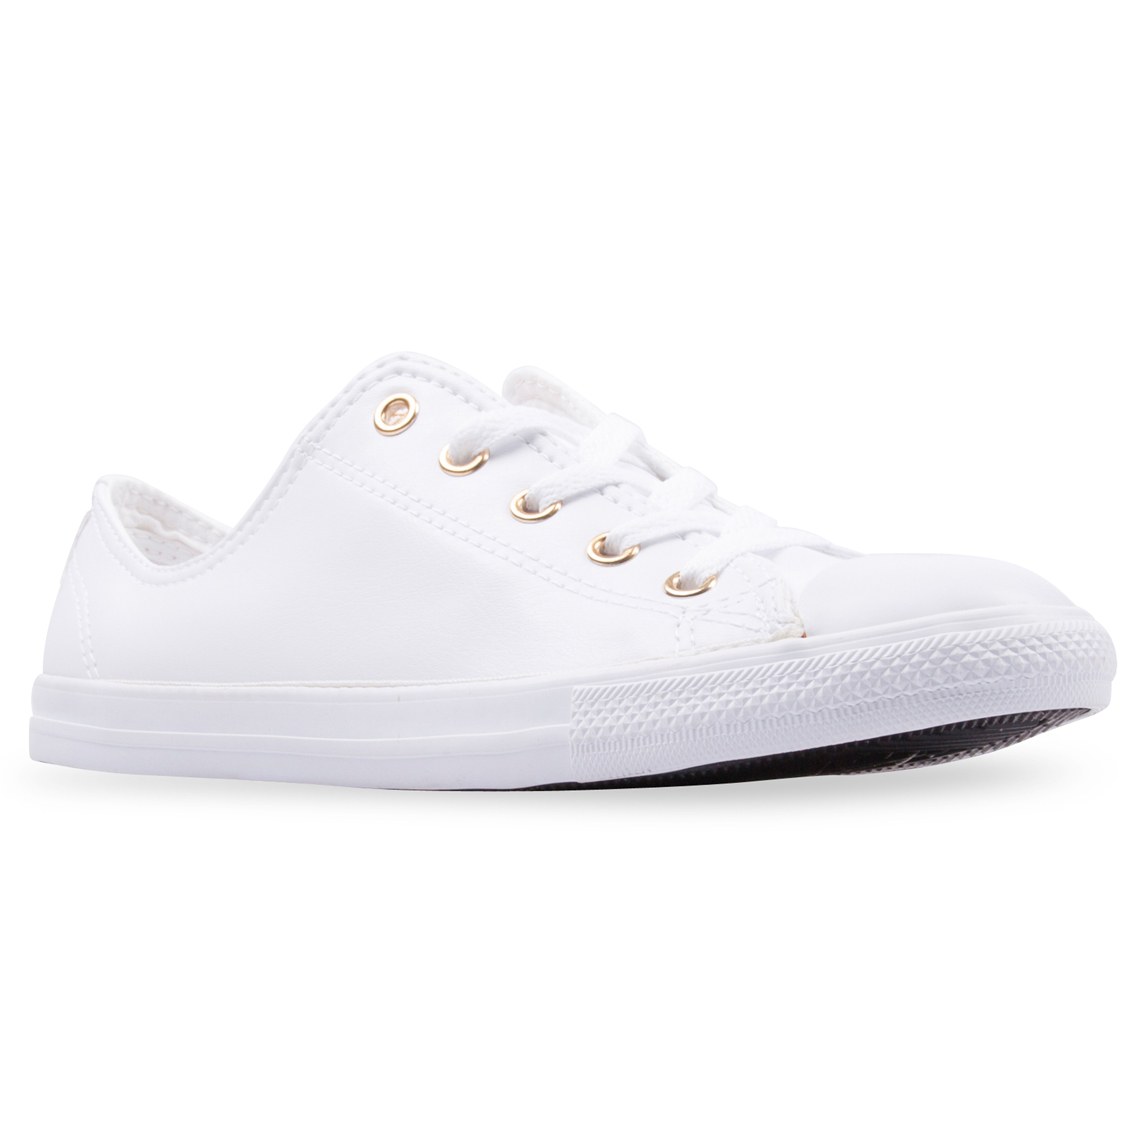 converse dainty white gold